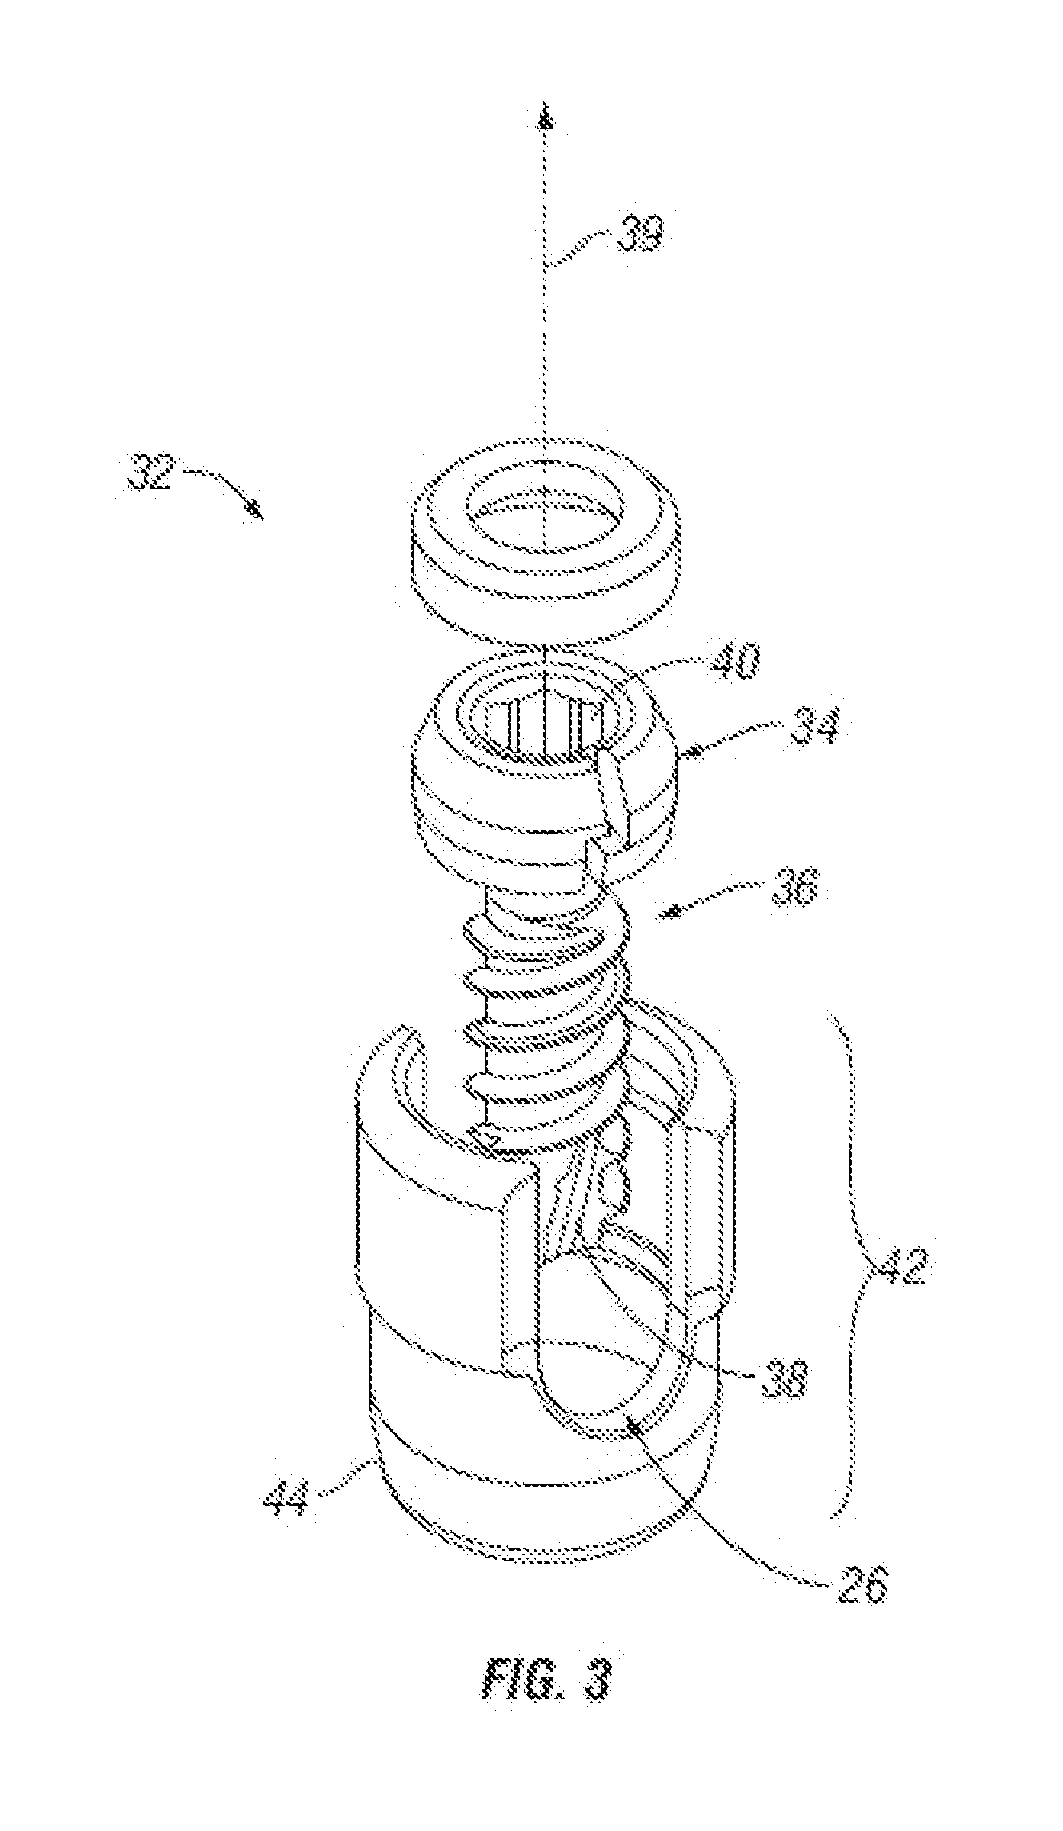 Devices and Methods for Inserting a Vertebral Fixation Member